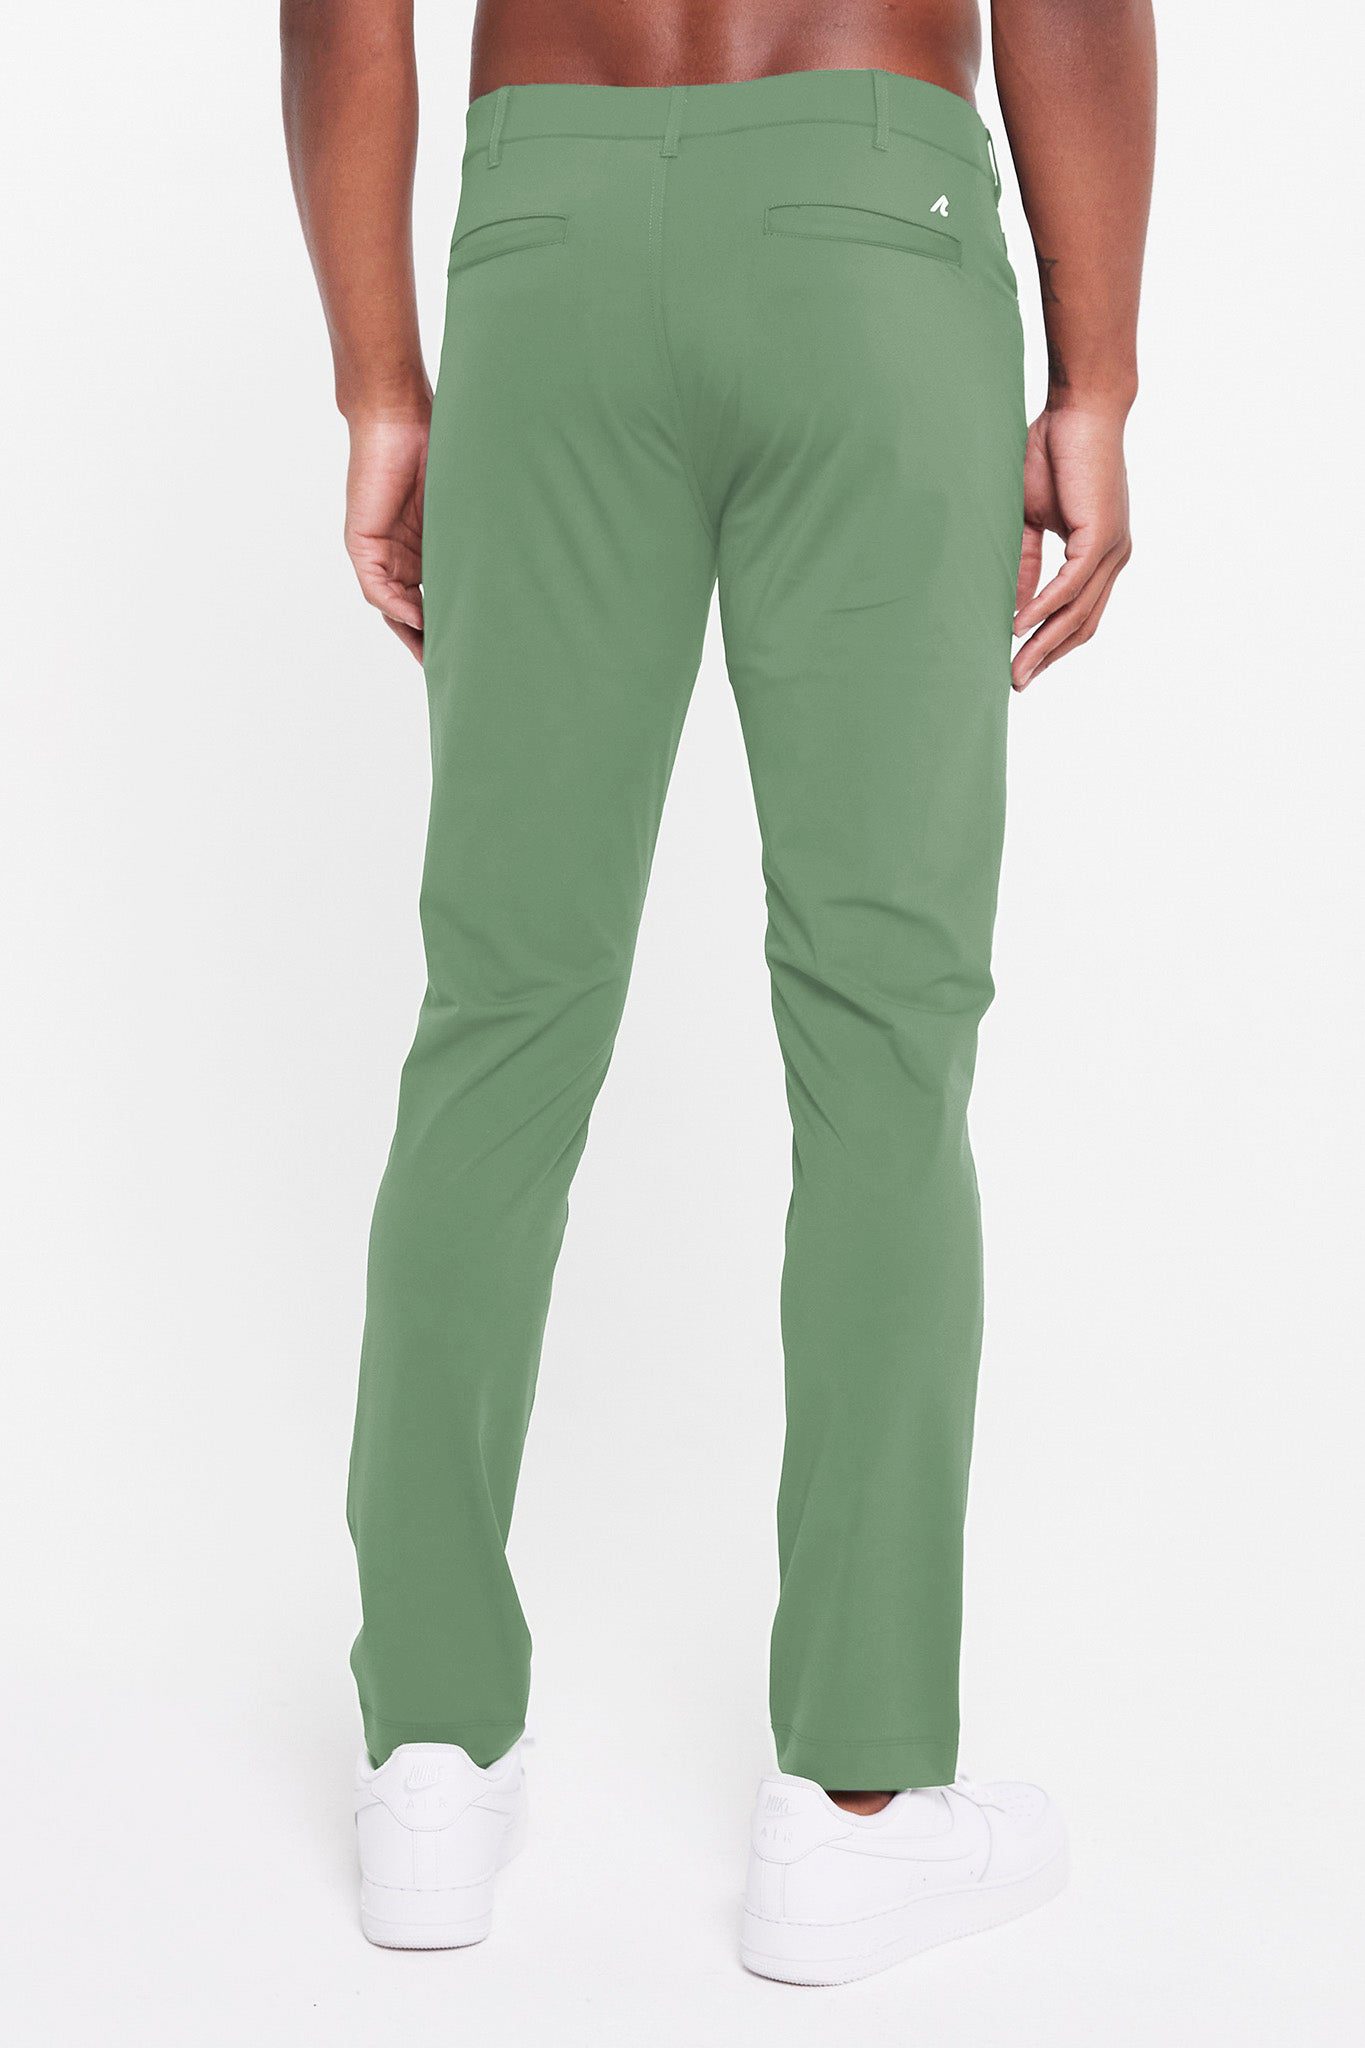 Image of the kent pull-on trouser in comfrey green